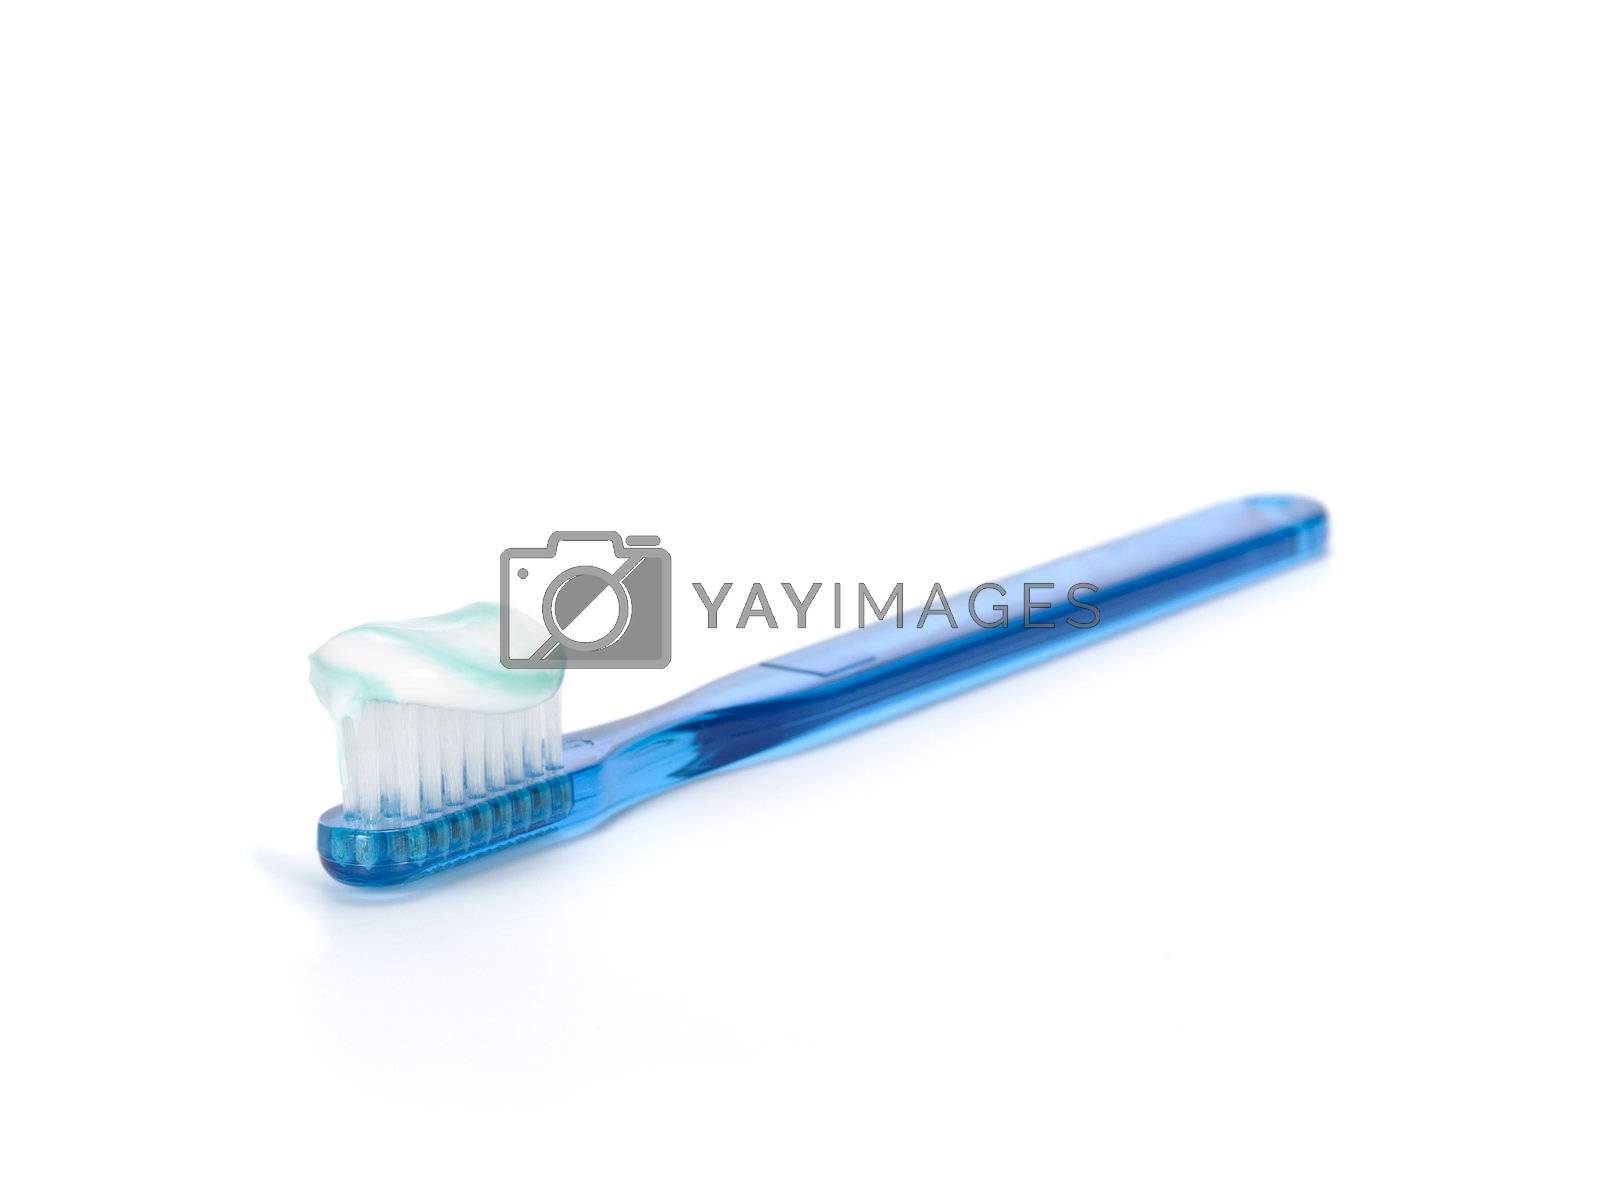 Royalty free image of Toothbrush full of toothpaste by antonprado